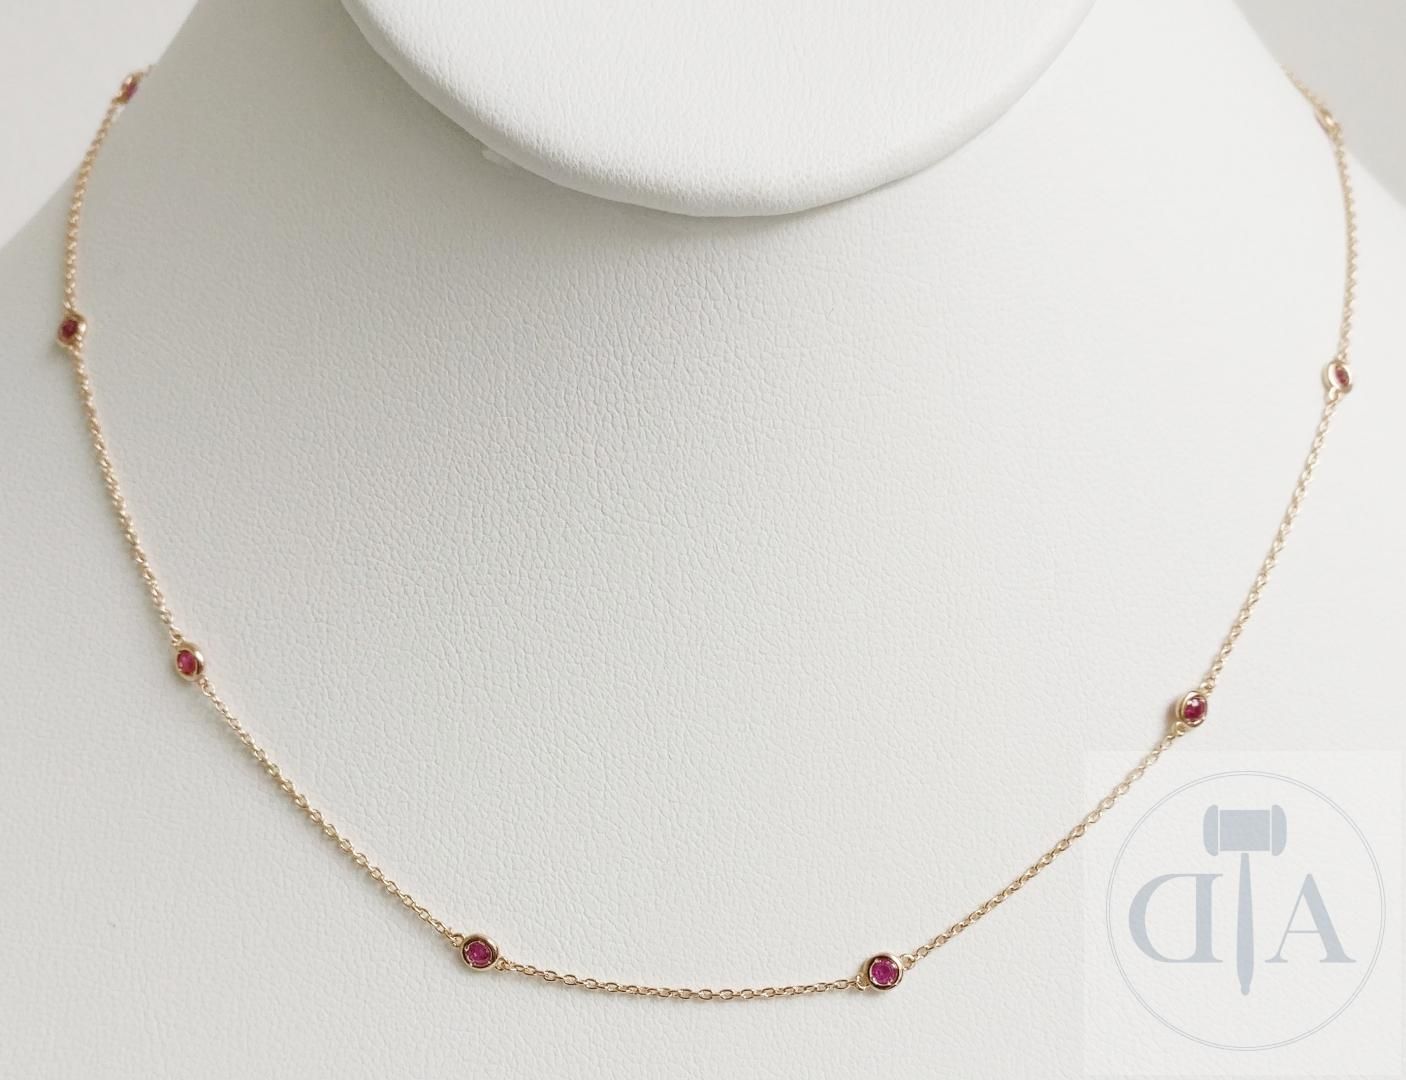 Null 0.66ct Ruby Necklace
- Material: 18 kt. Rose Gold
- Gross Weight: 2.66 gram&hellip;